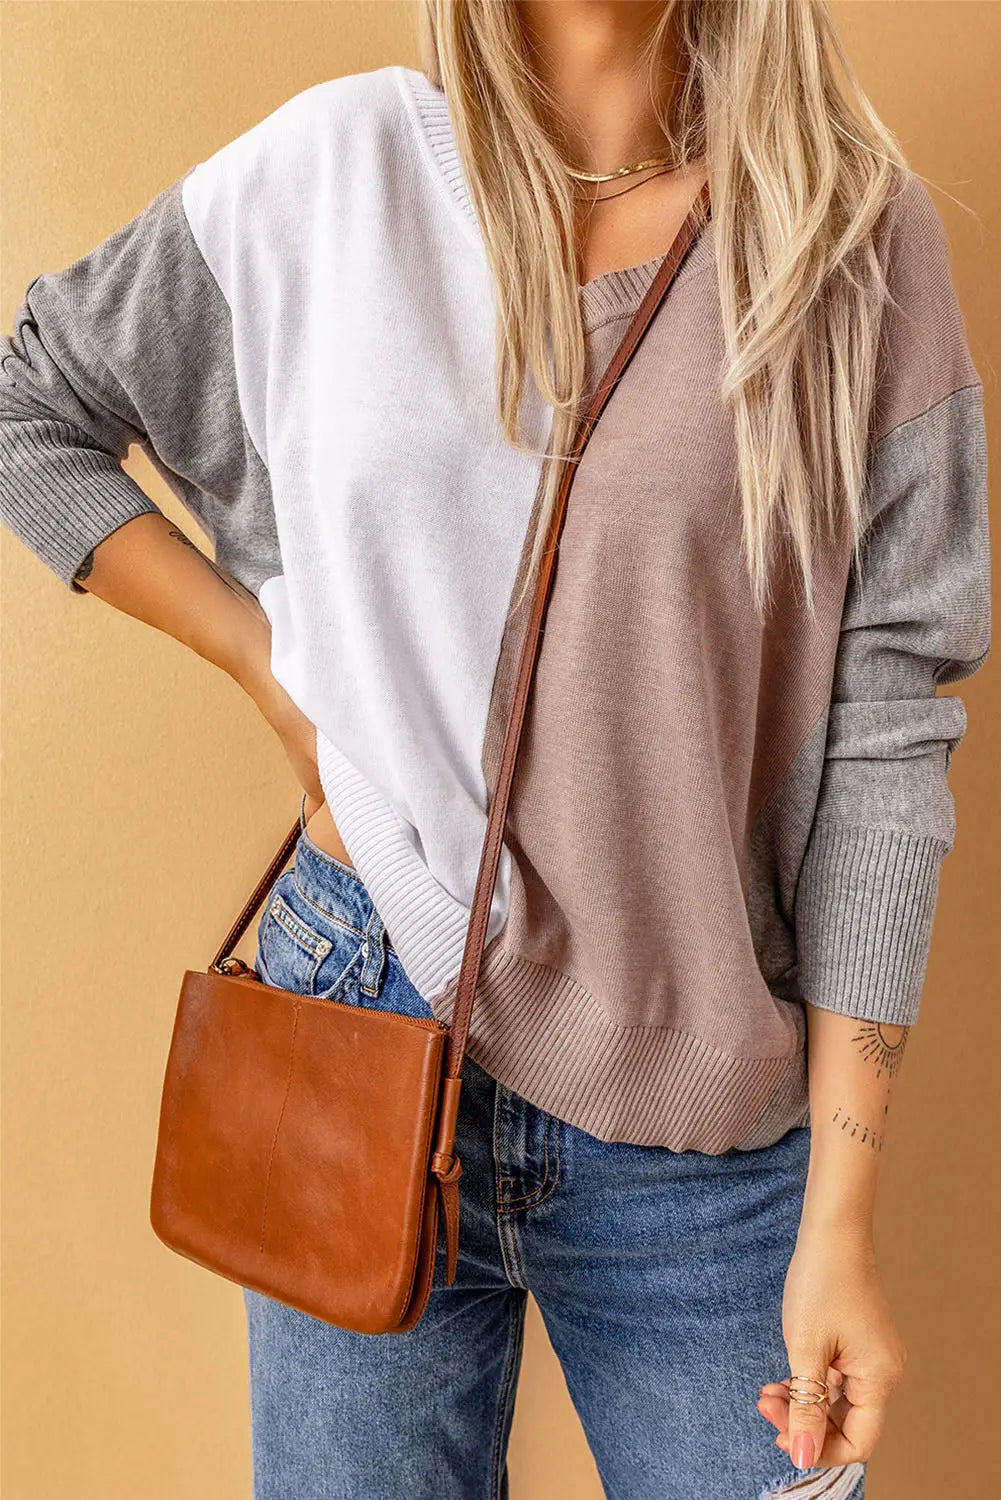 Apricot v-neck color block loose sweater - s /